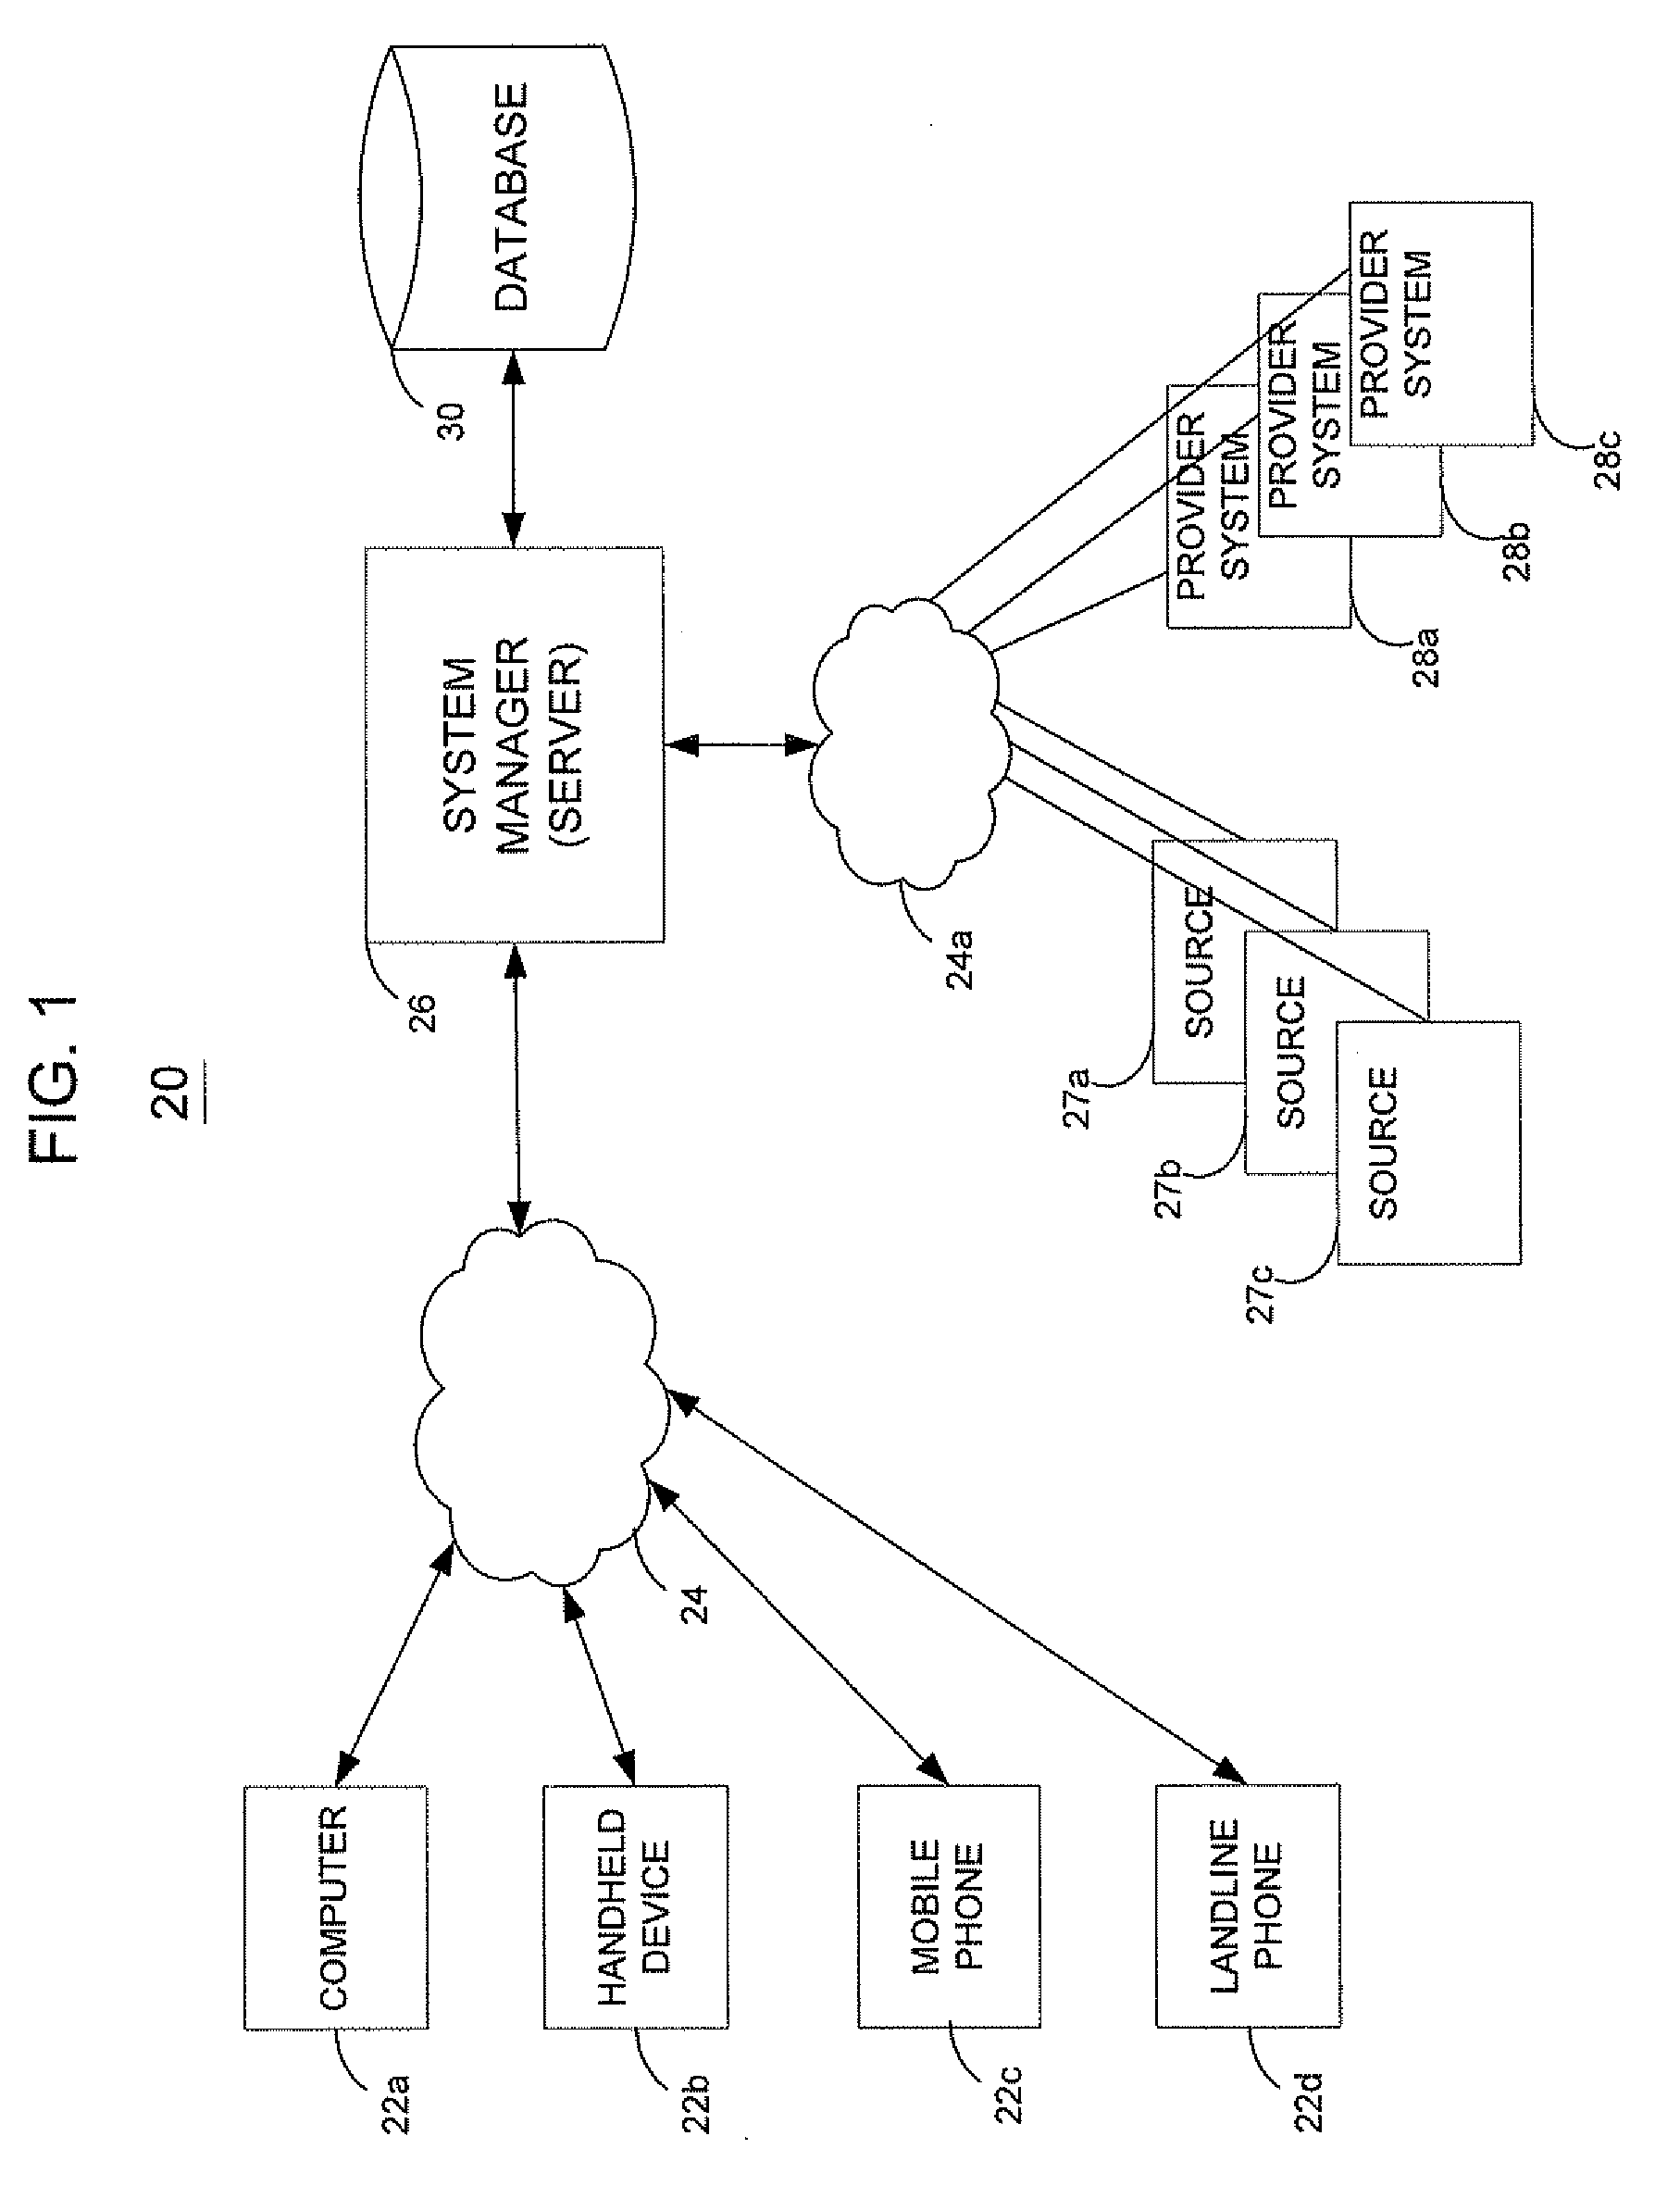 Method and system for qualifying keywords in query strings